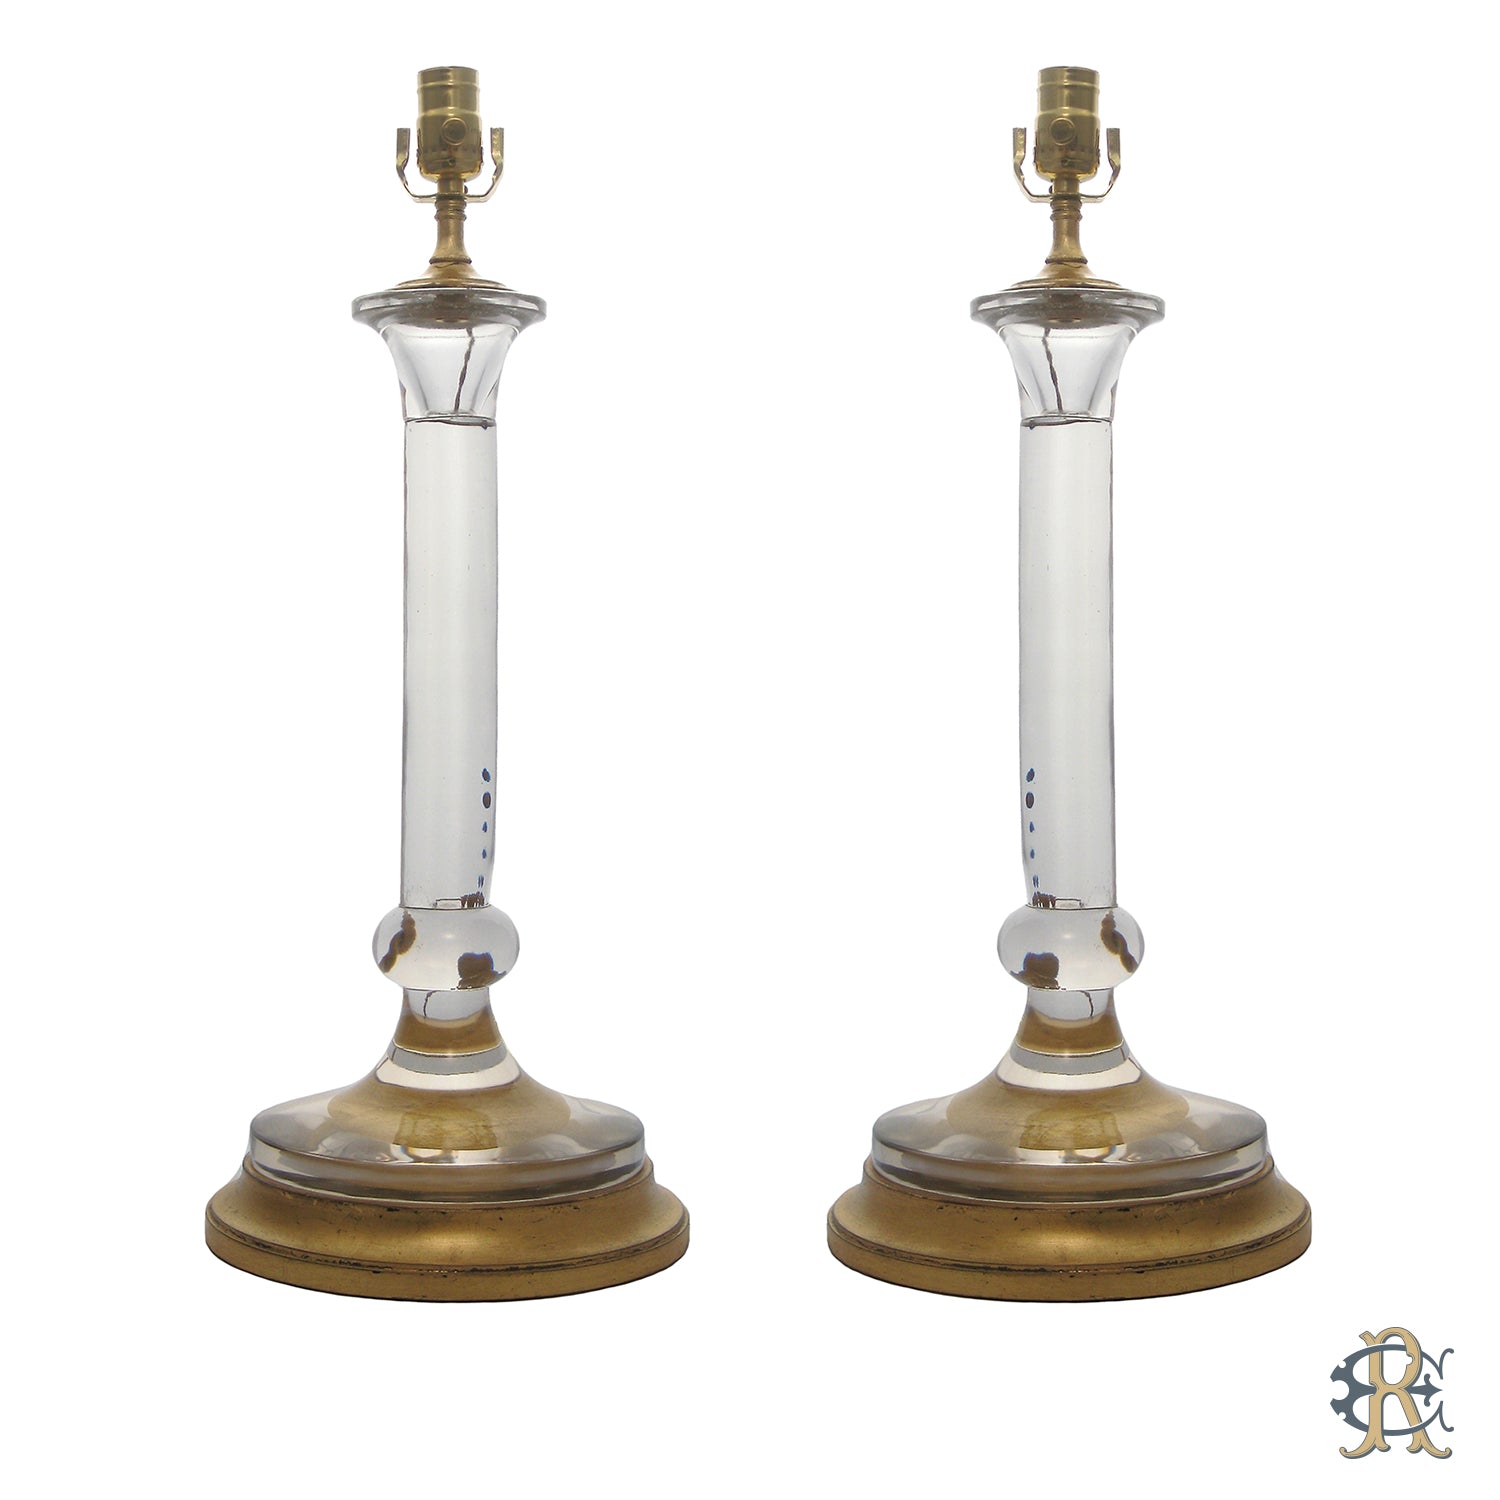 Pair of Elegant Glass Candlestick Lamps with Gilt Bases - Edgar Reeves Lighting